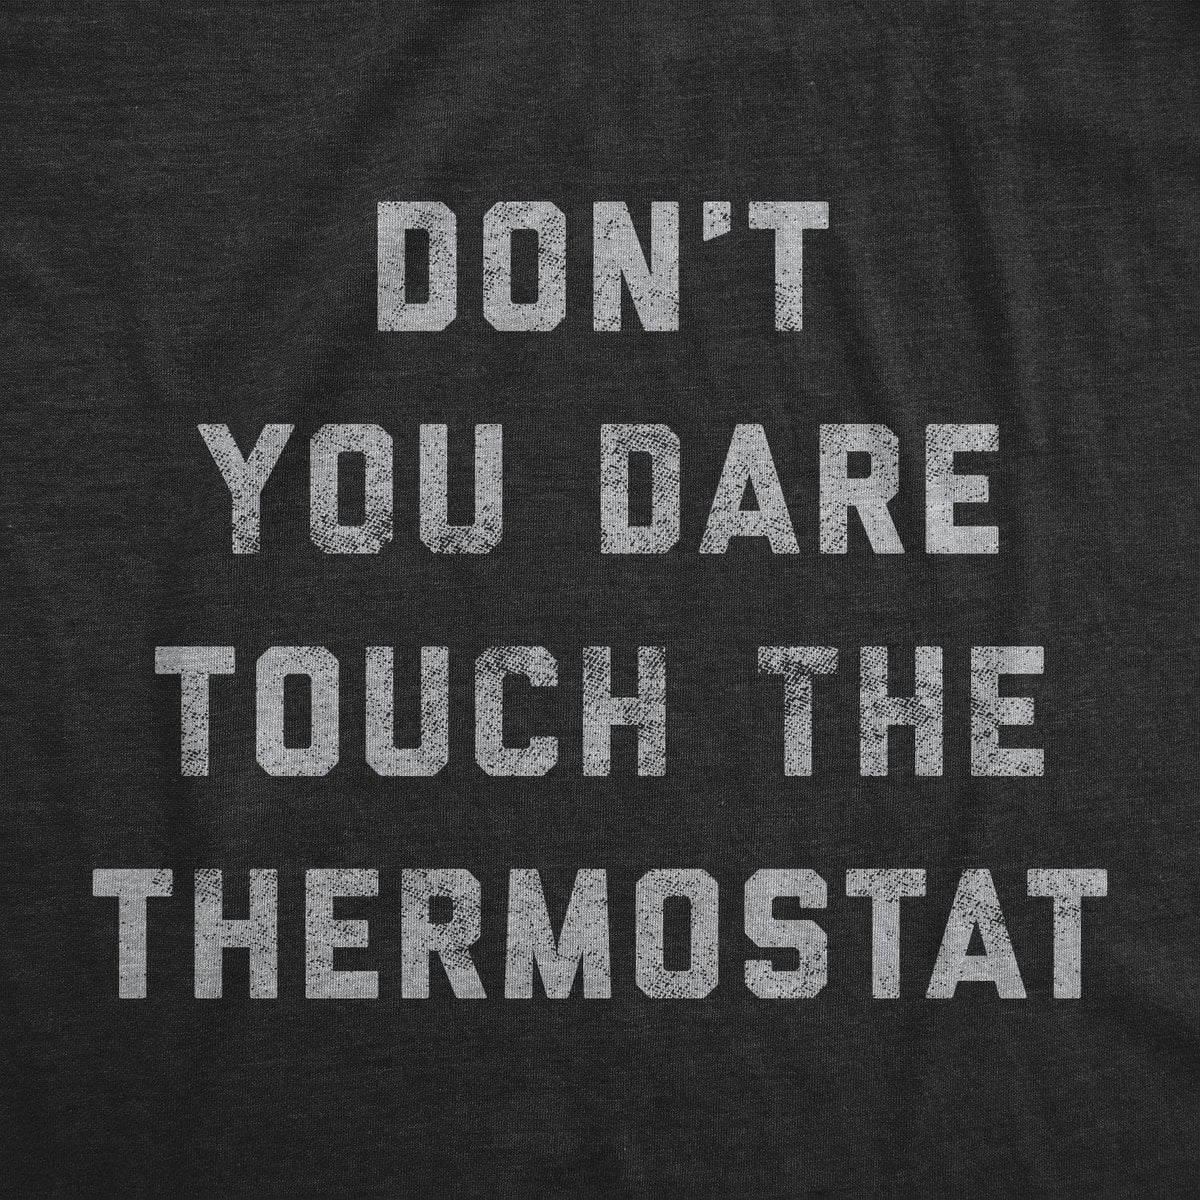 Don&#39;t You Dare Touch The Thermostat Men&#39;s Tshirt - Crazy Dog T-Shirts